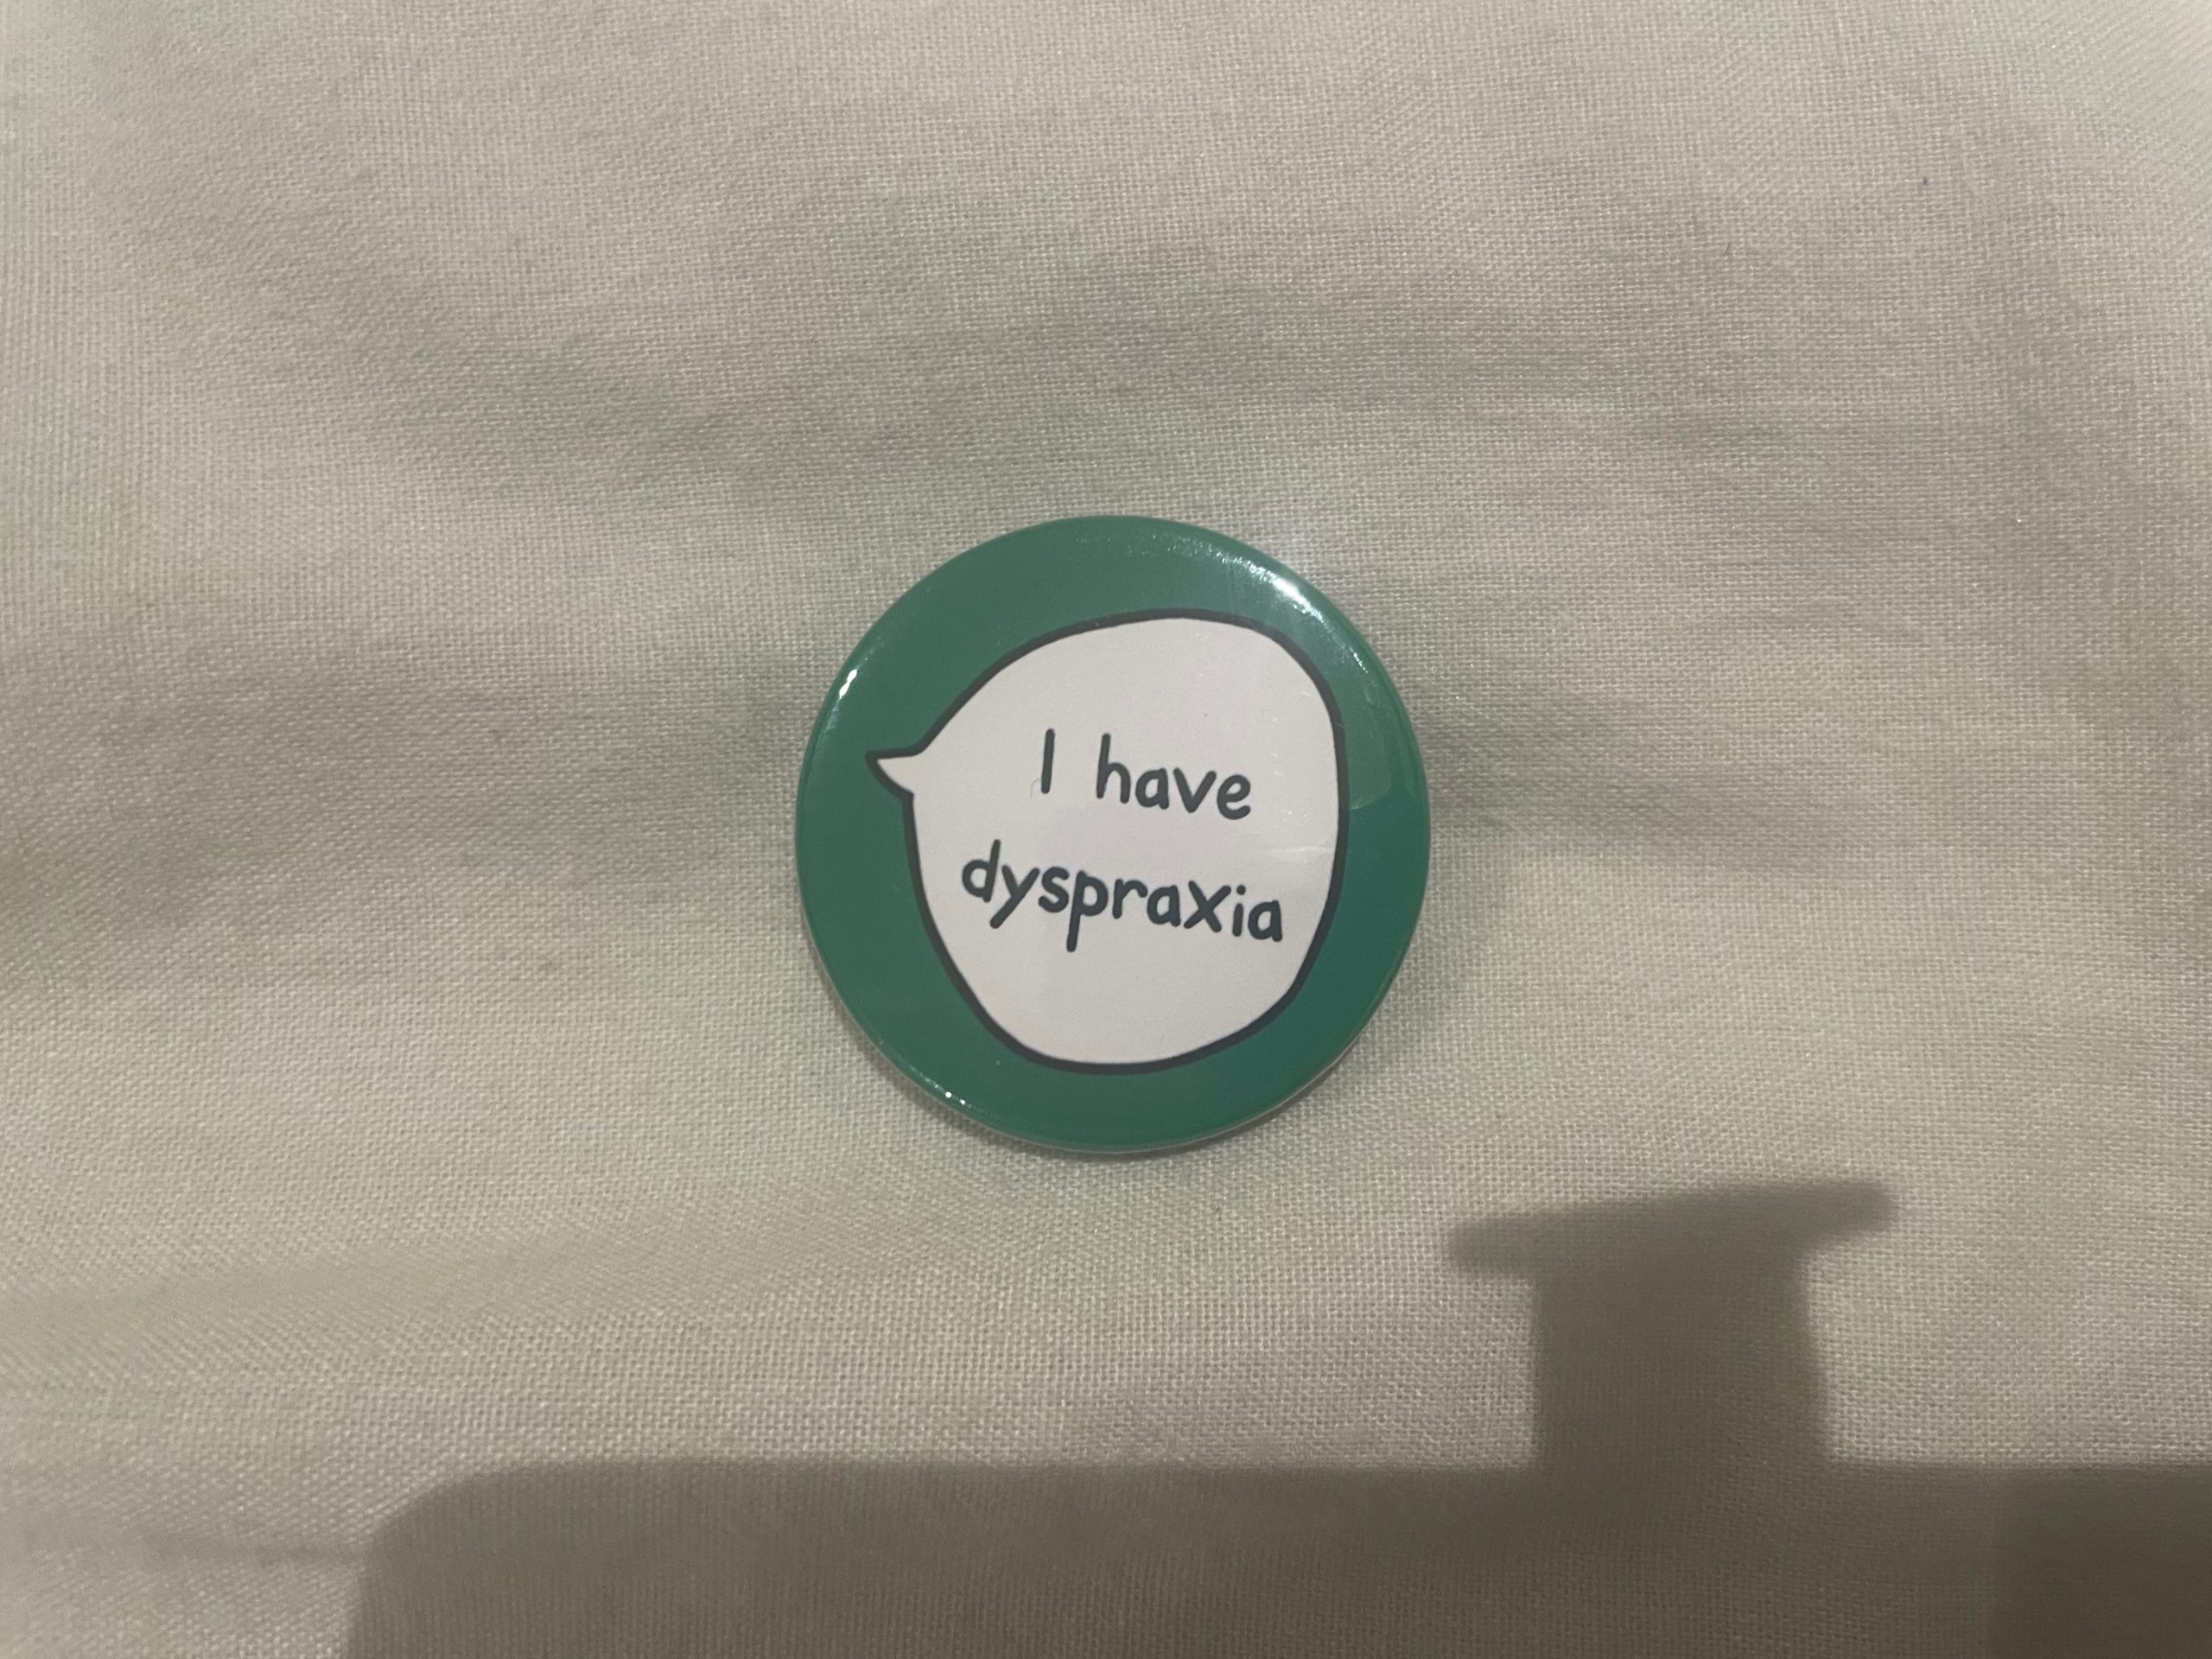 A green badge with a speech bubble that says, "I have dyspraxia," lies on a grey bedsheet.